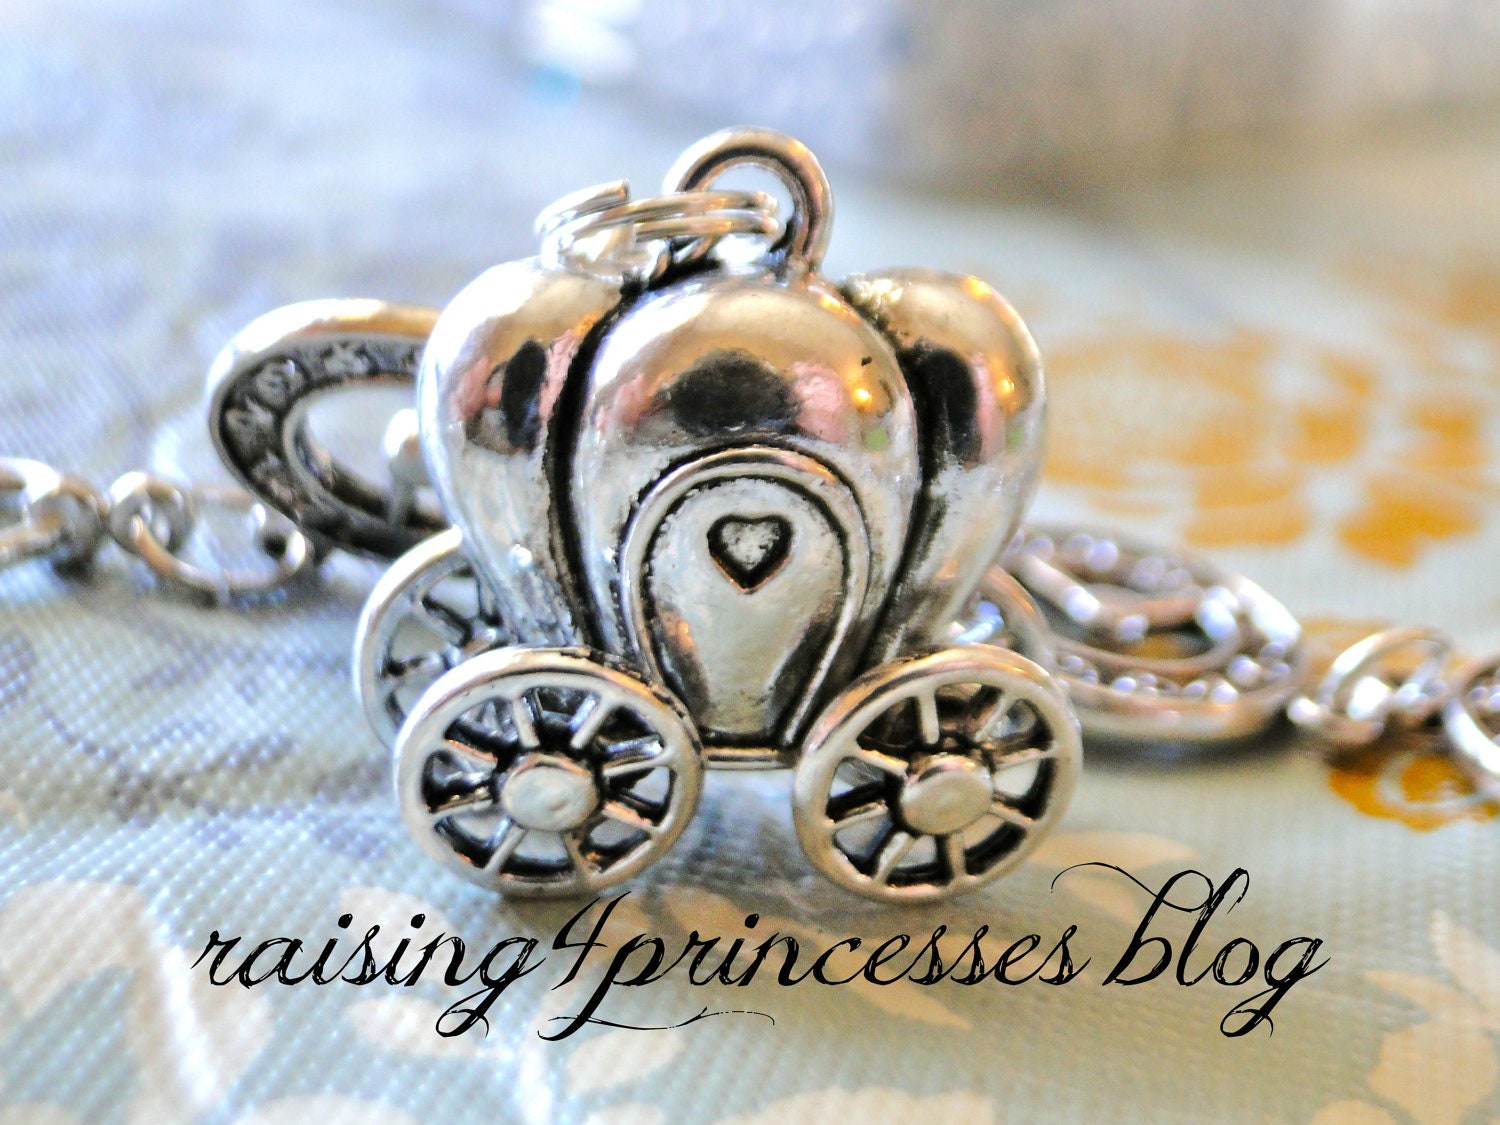 Wait for your Prince Bracelet and Earrings Set - Antique Silver Carriage with Moving Wheels - Pearl and Silver